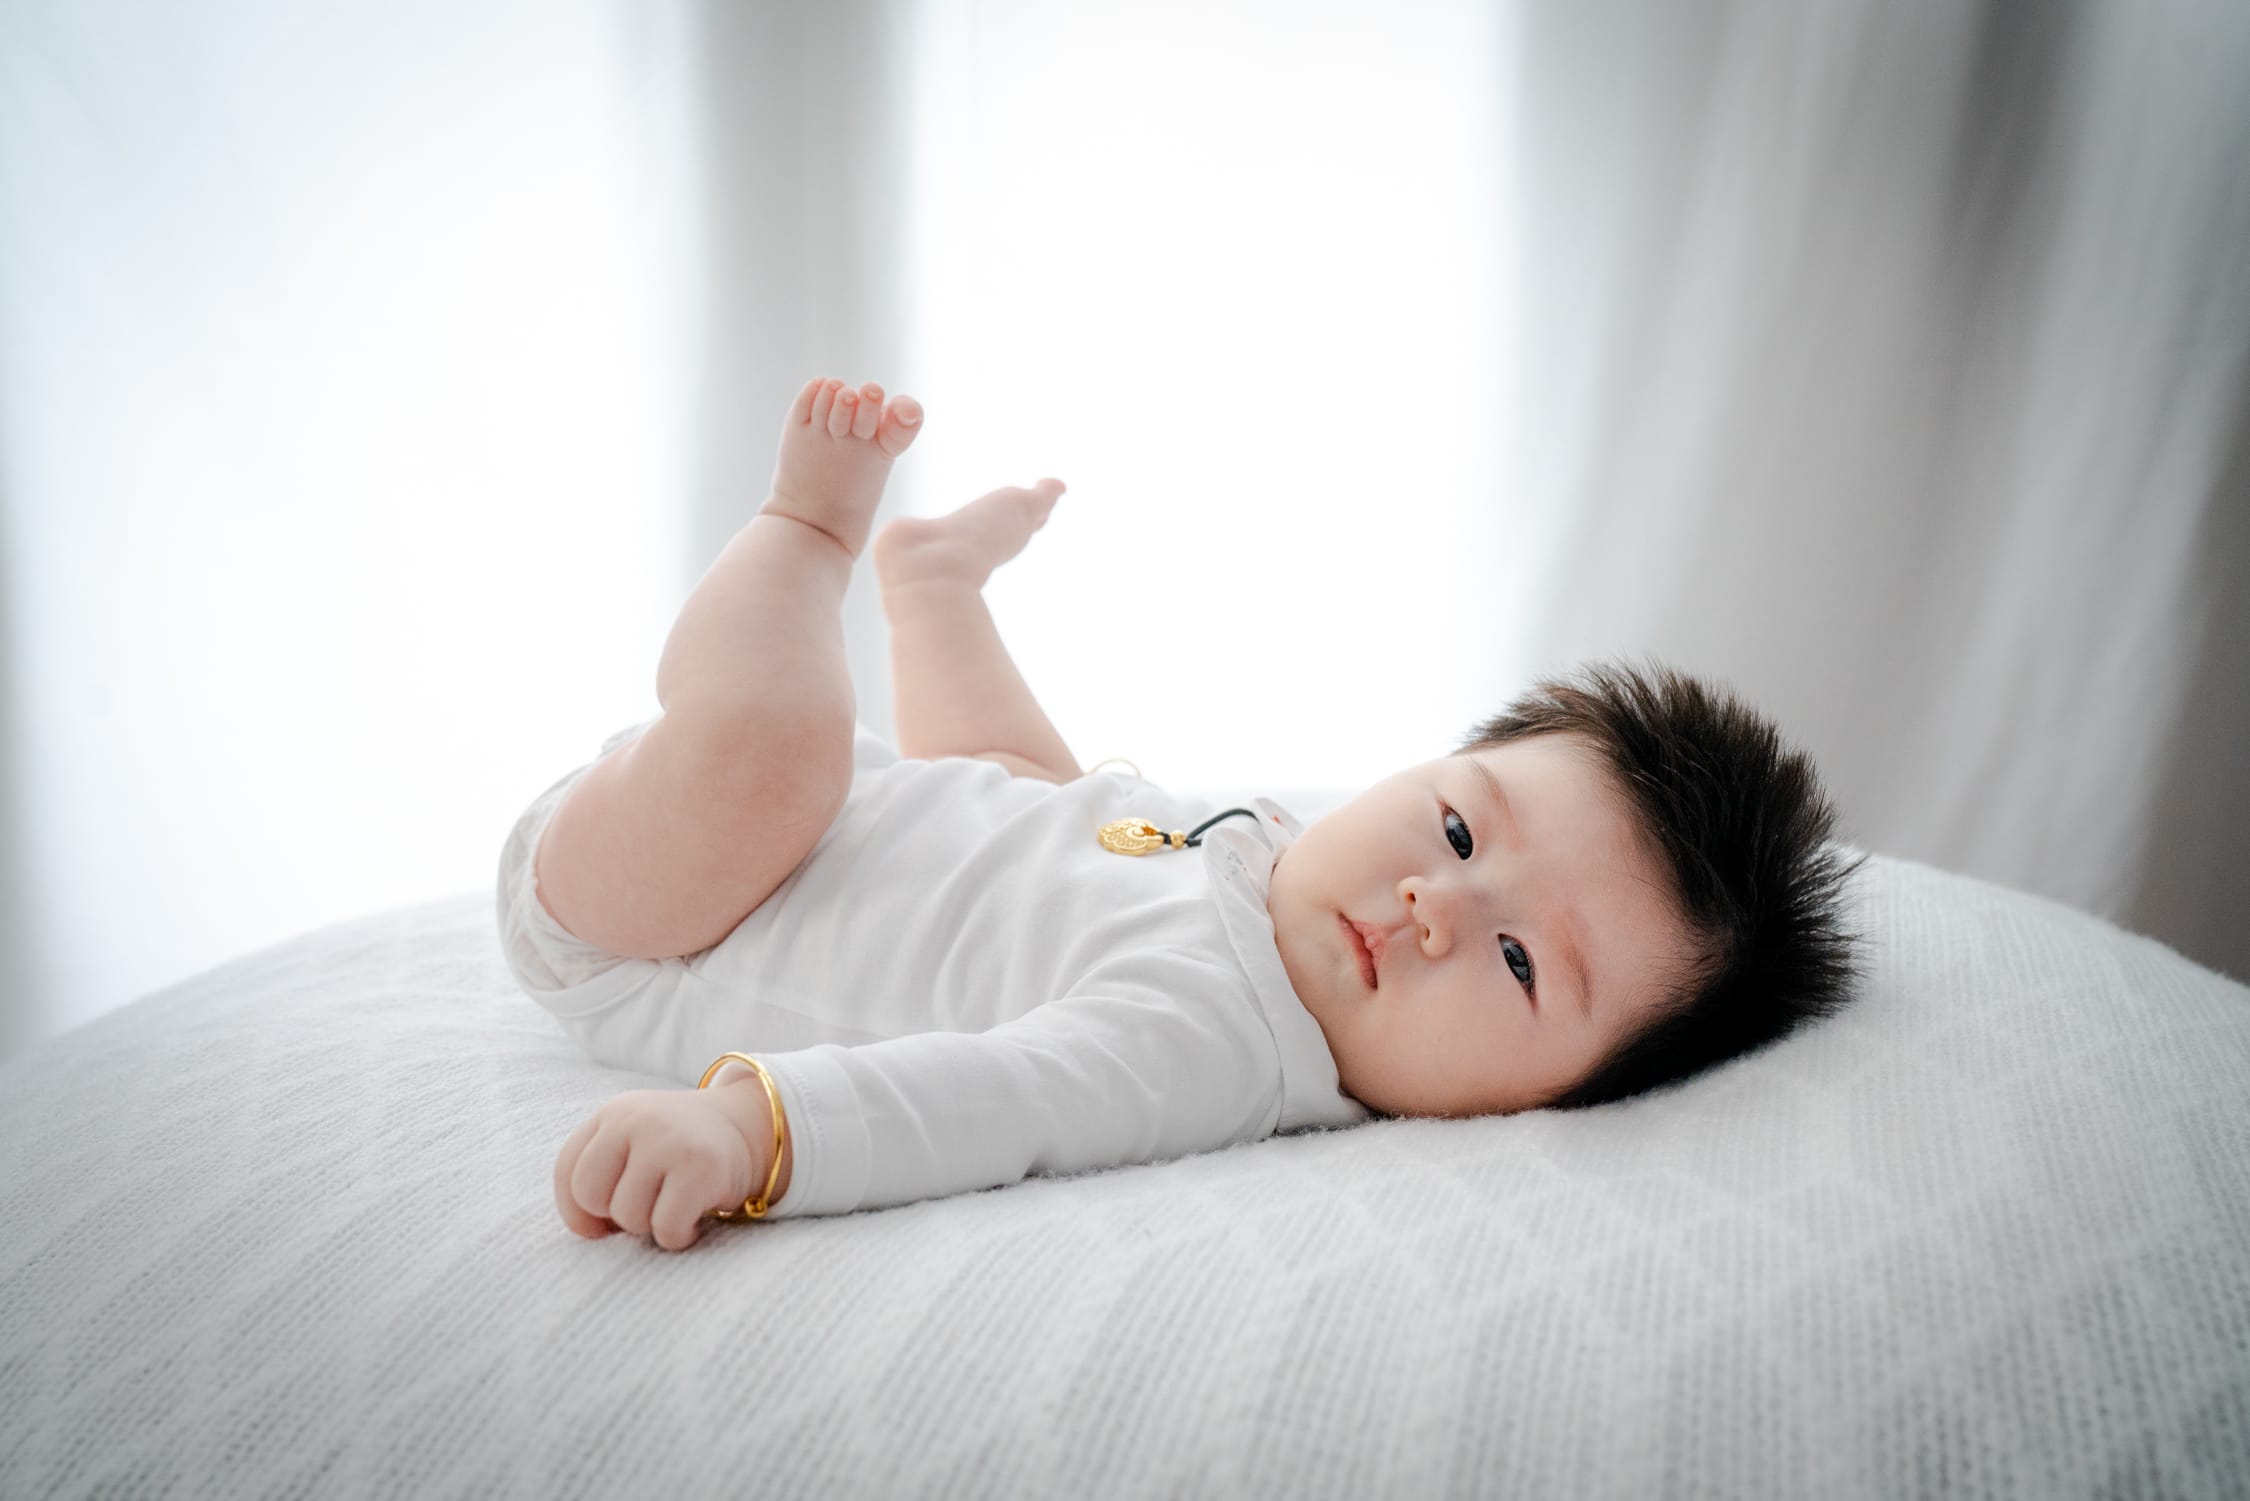 Newborn baby lying down with feet up in a photography studio setting during a natural light newborn photoshoot in Singapore, White Room Studio. Credit: White Room Studio Pte Ltd